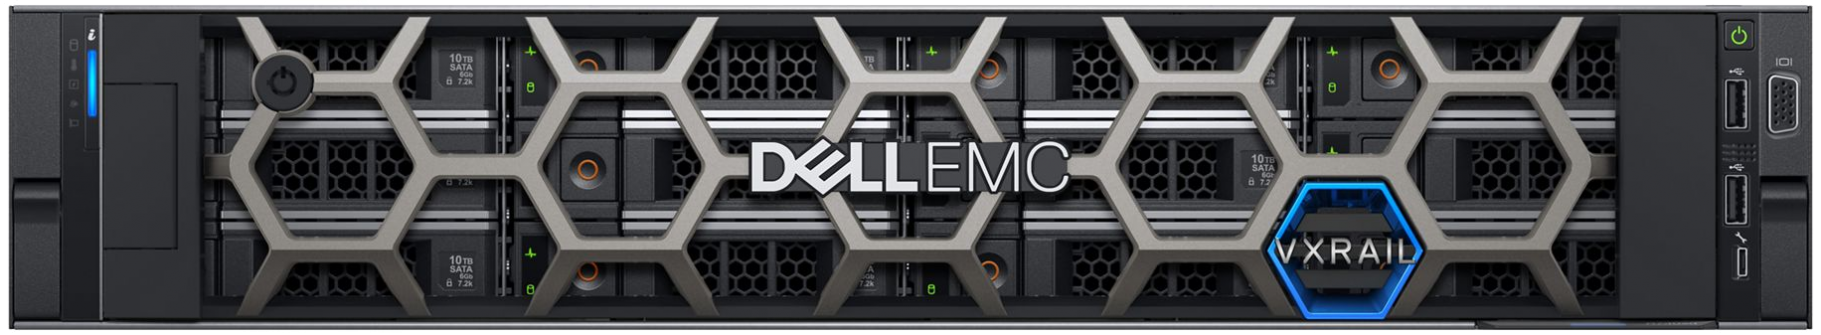 Dell VxRail